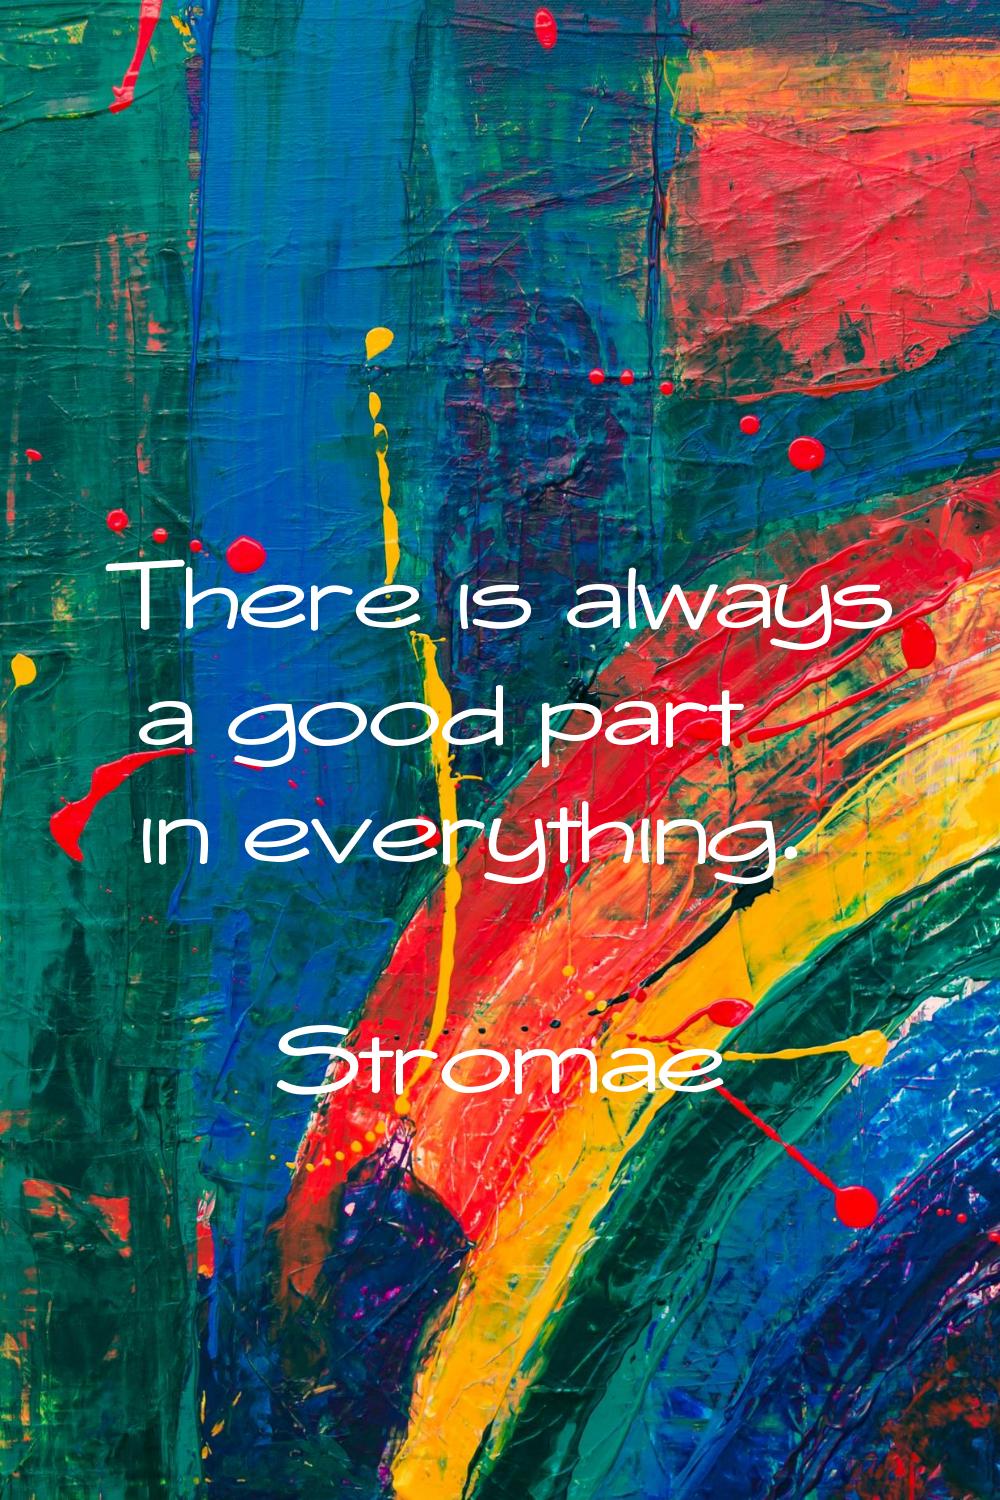 There is always a good part in everything.